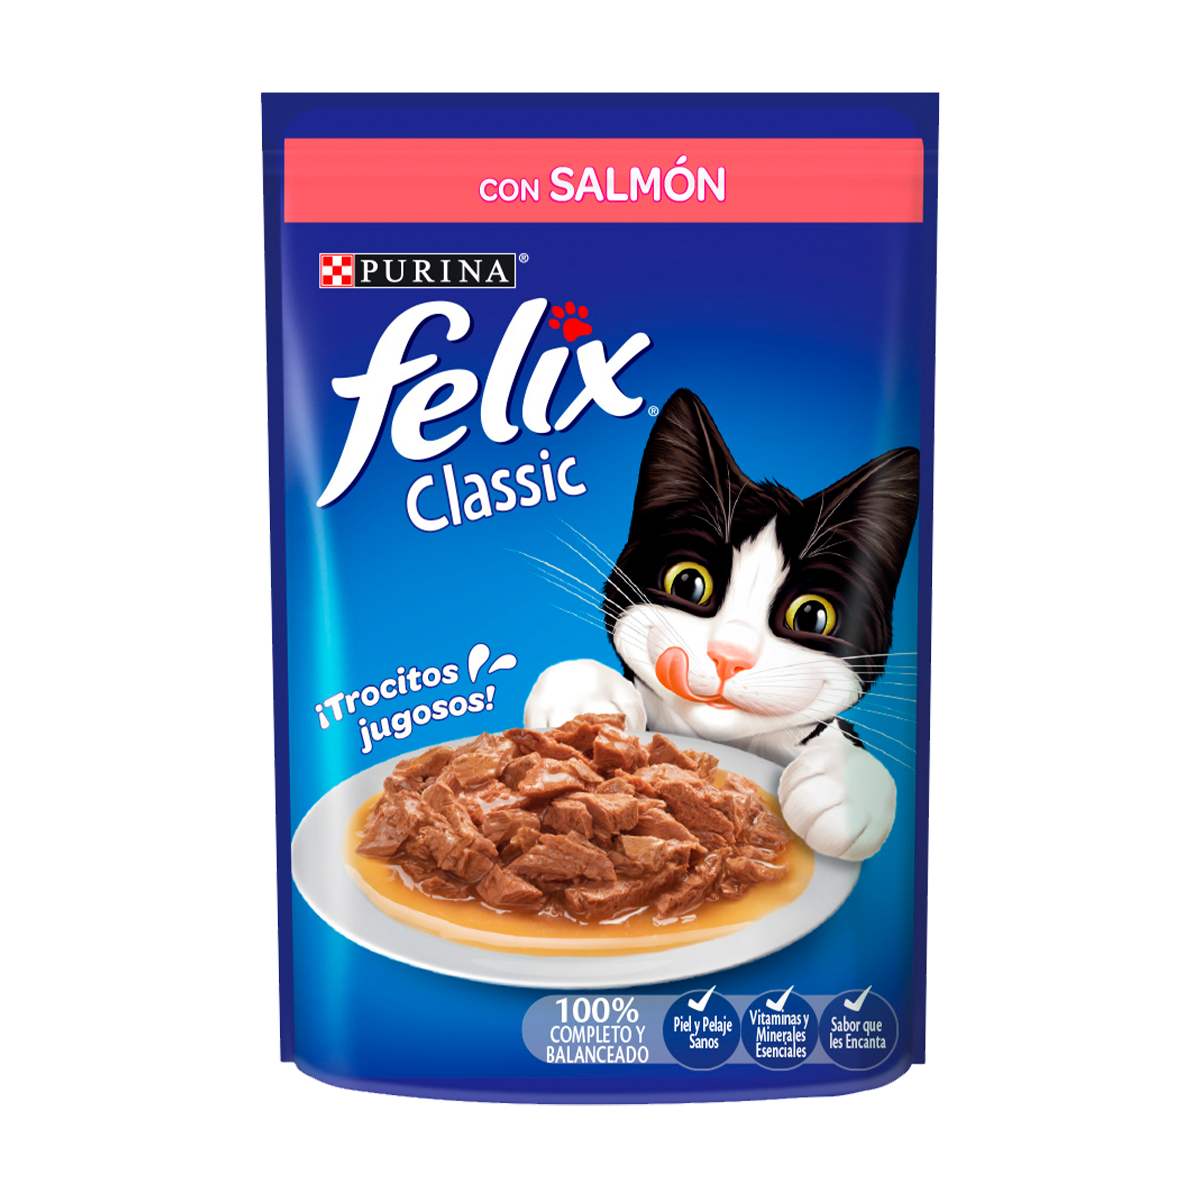 purina-felix-salmon-front.png